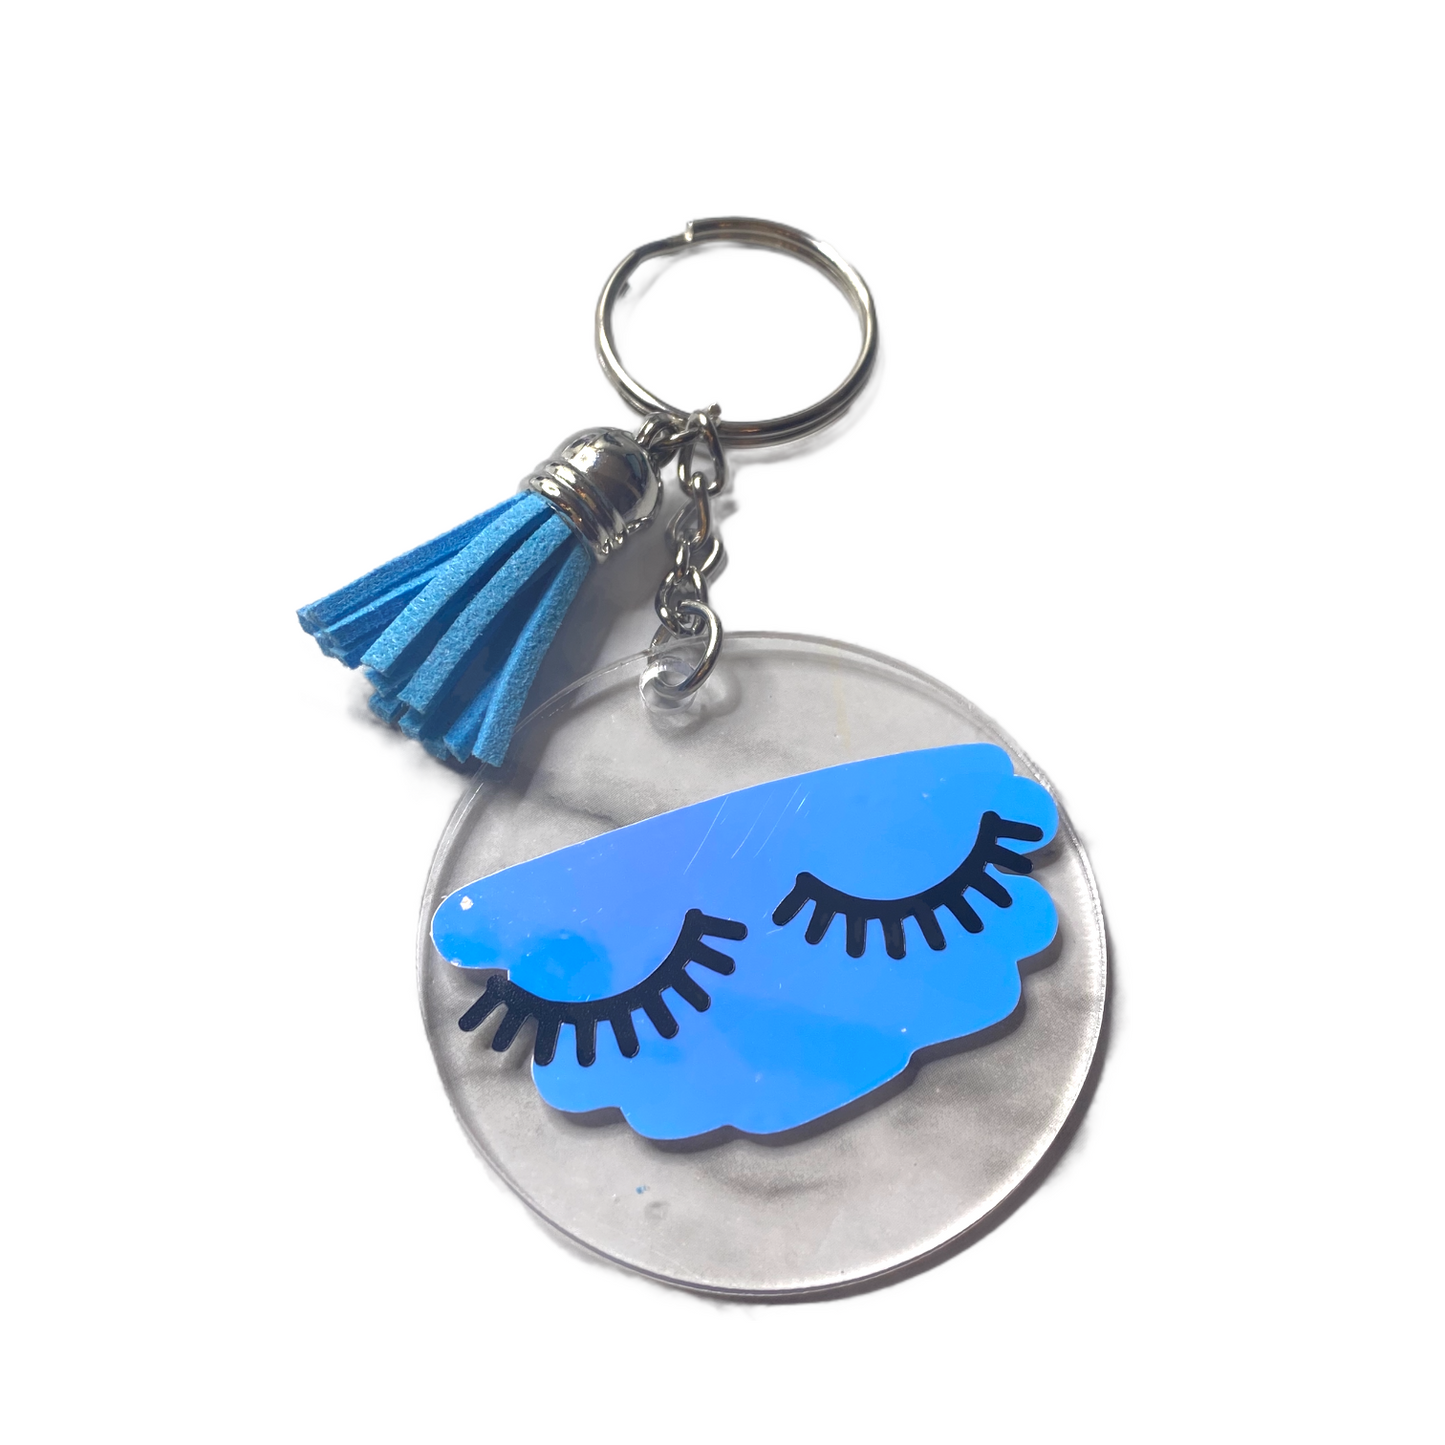 Keychains | Tassel color may vary